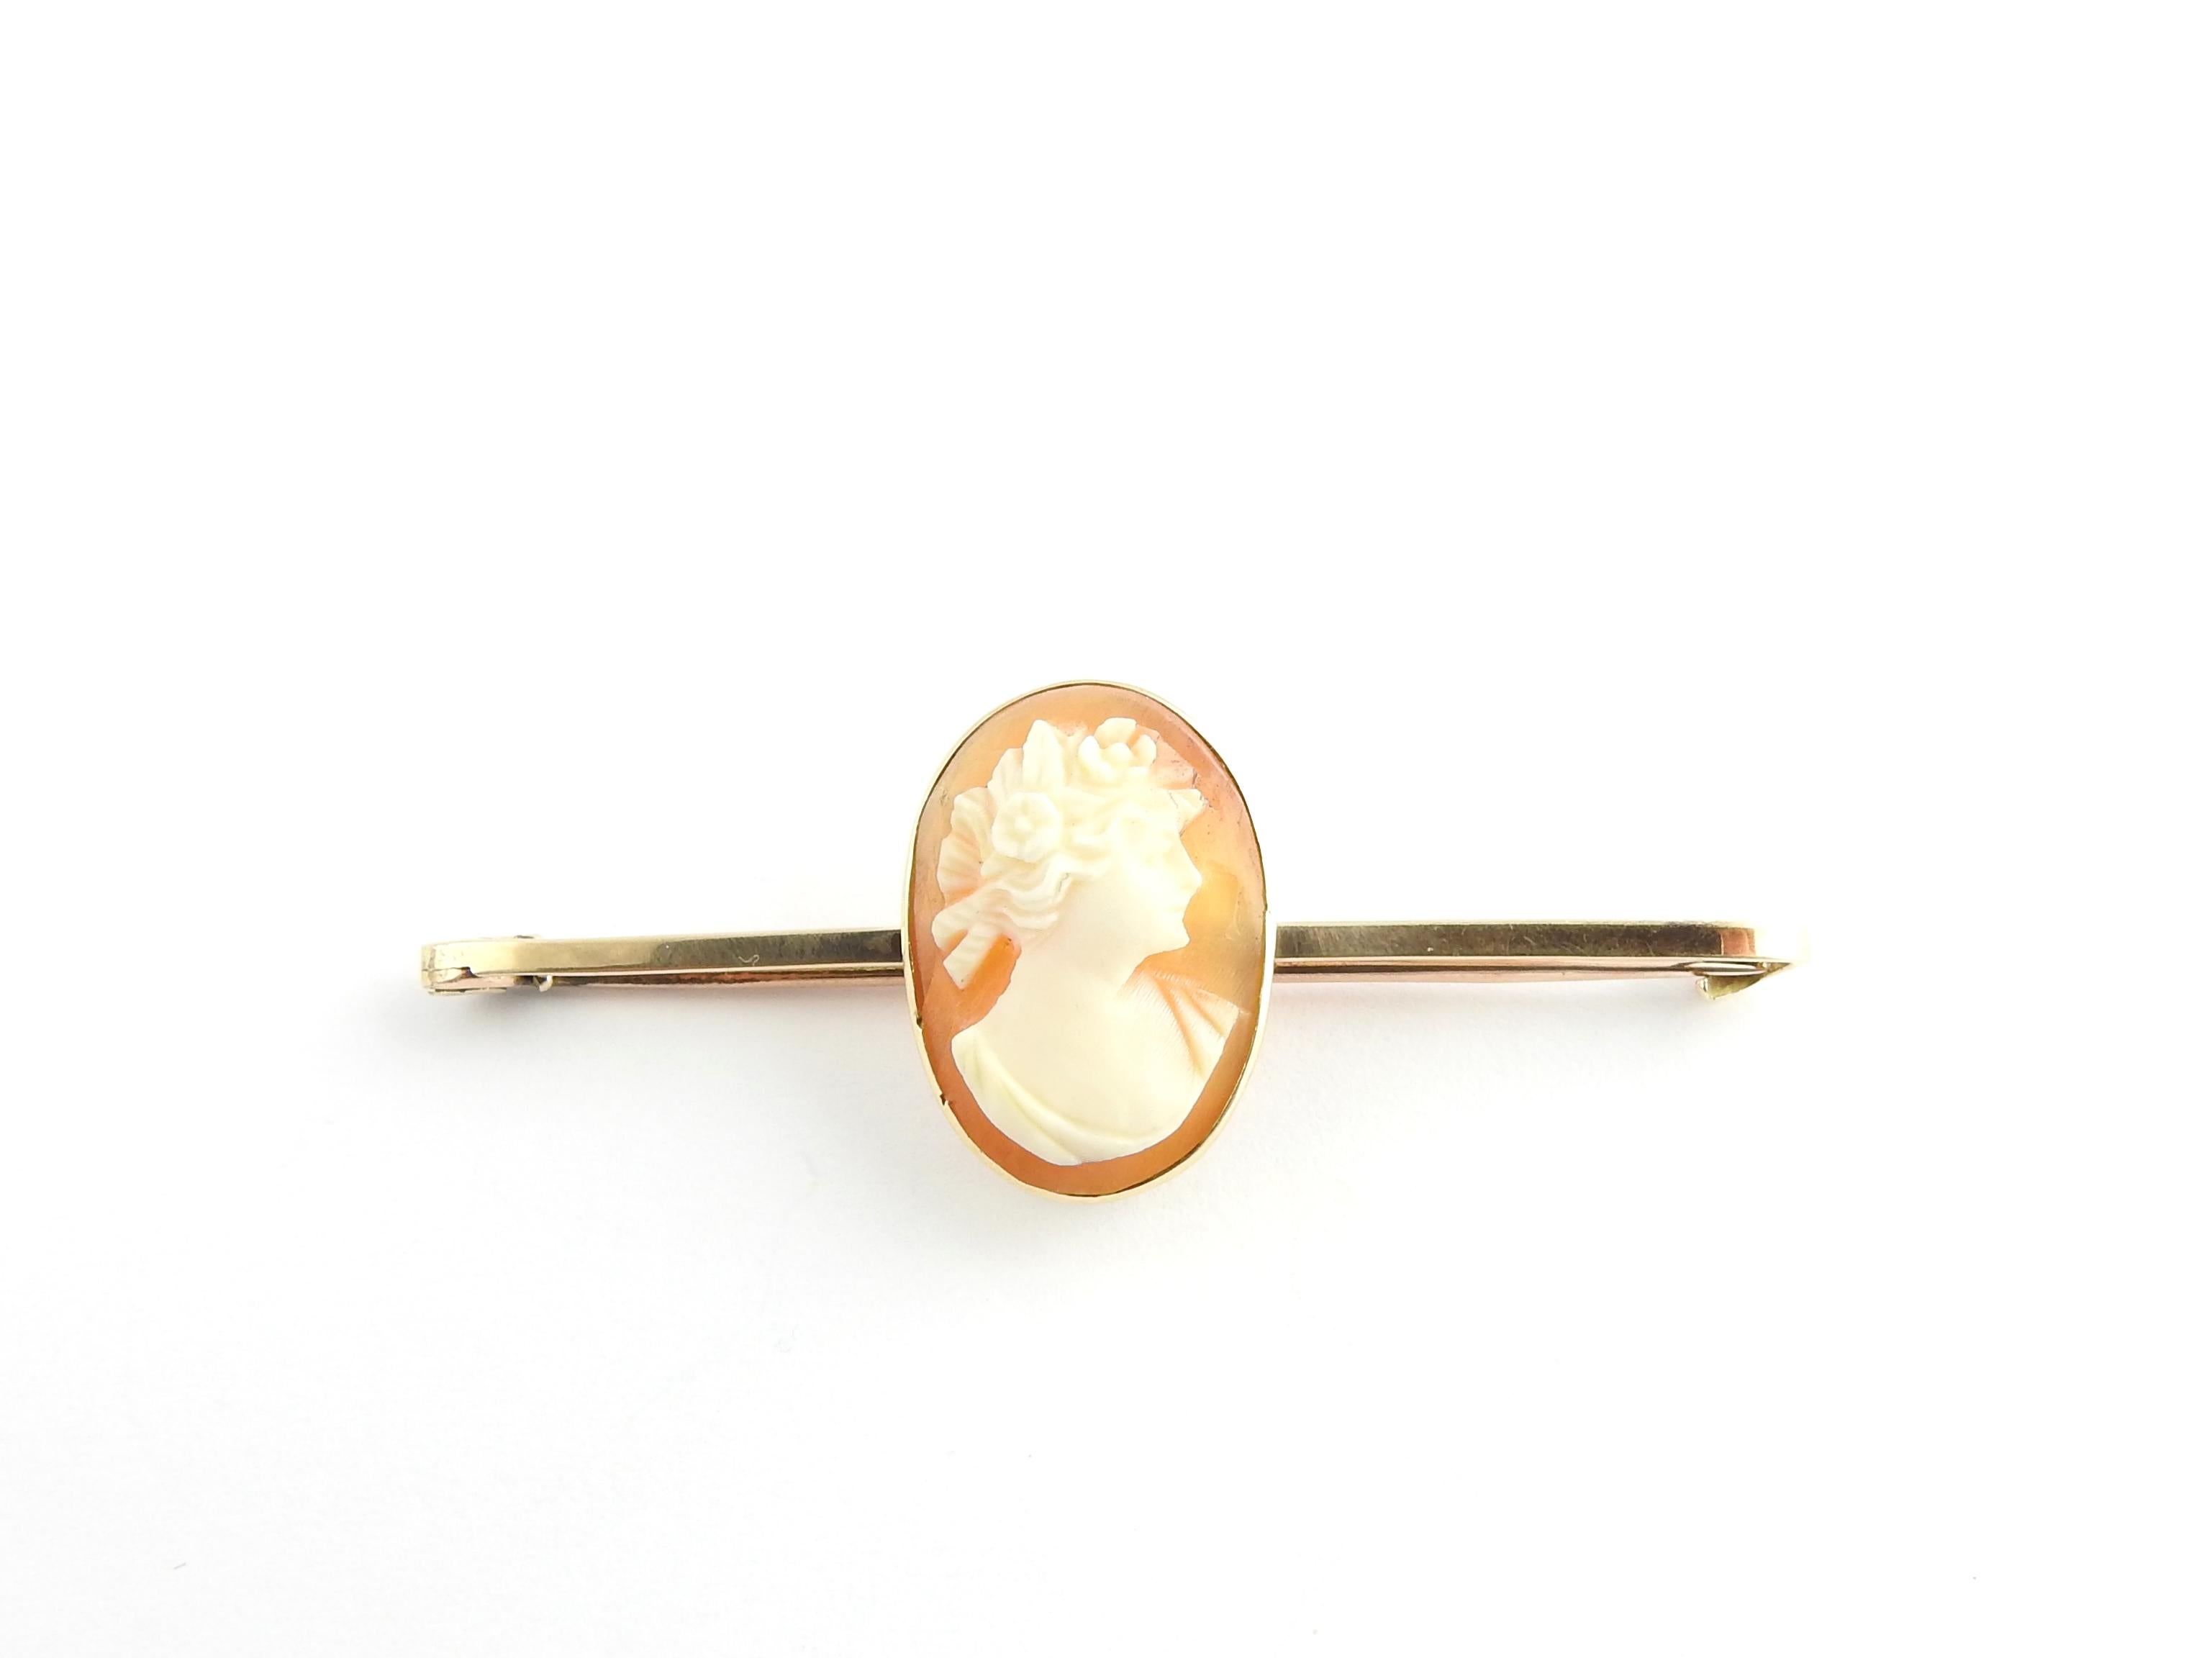 Vintage 9 Karat Yellow Gold Cameo Brooch/Pin

This lovely pin features an elegant cameo  18 mm x 12 mm  set in classic 9K yellow gold.

Size: 50 mm x 18 mm

Weight: 2.1 dwt. / 3.3 gr.

Stamped: 9C

Very good condition, professionally polished.

Will